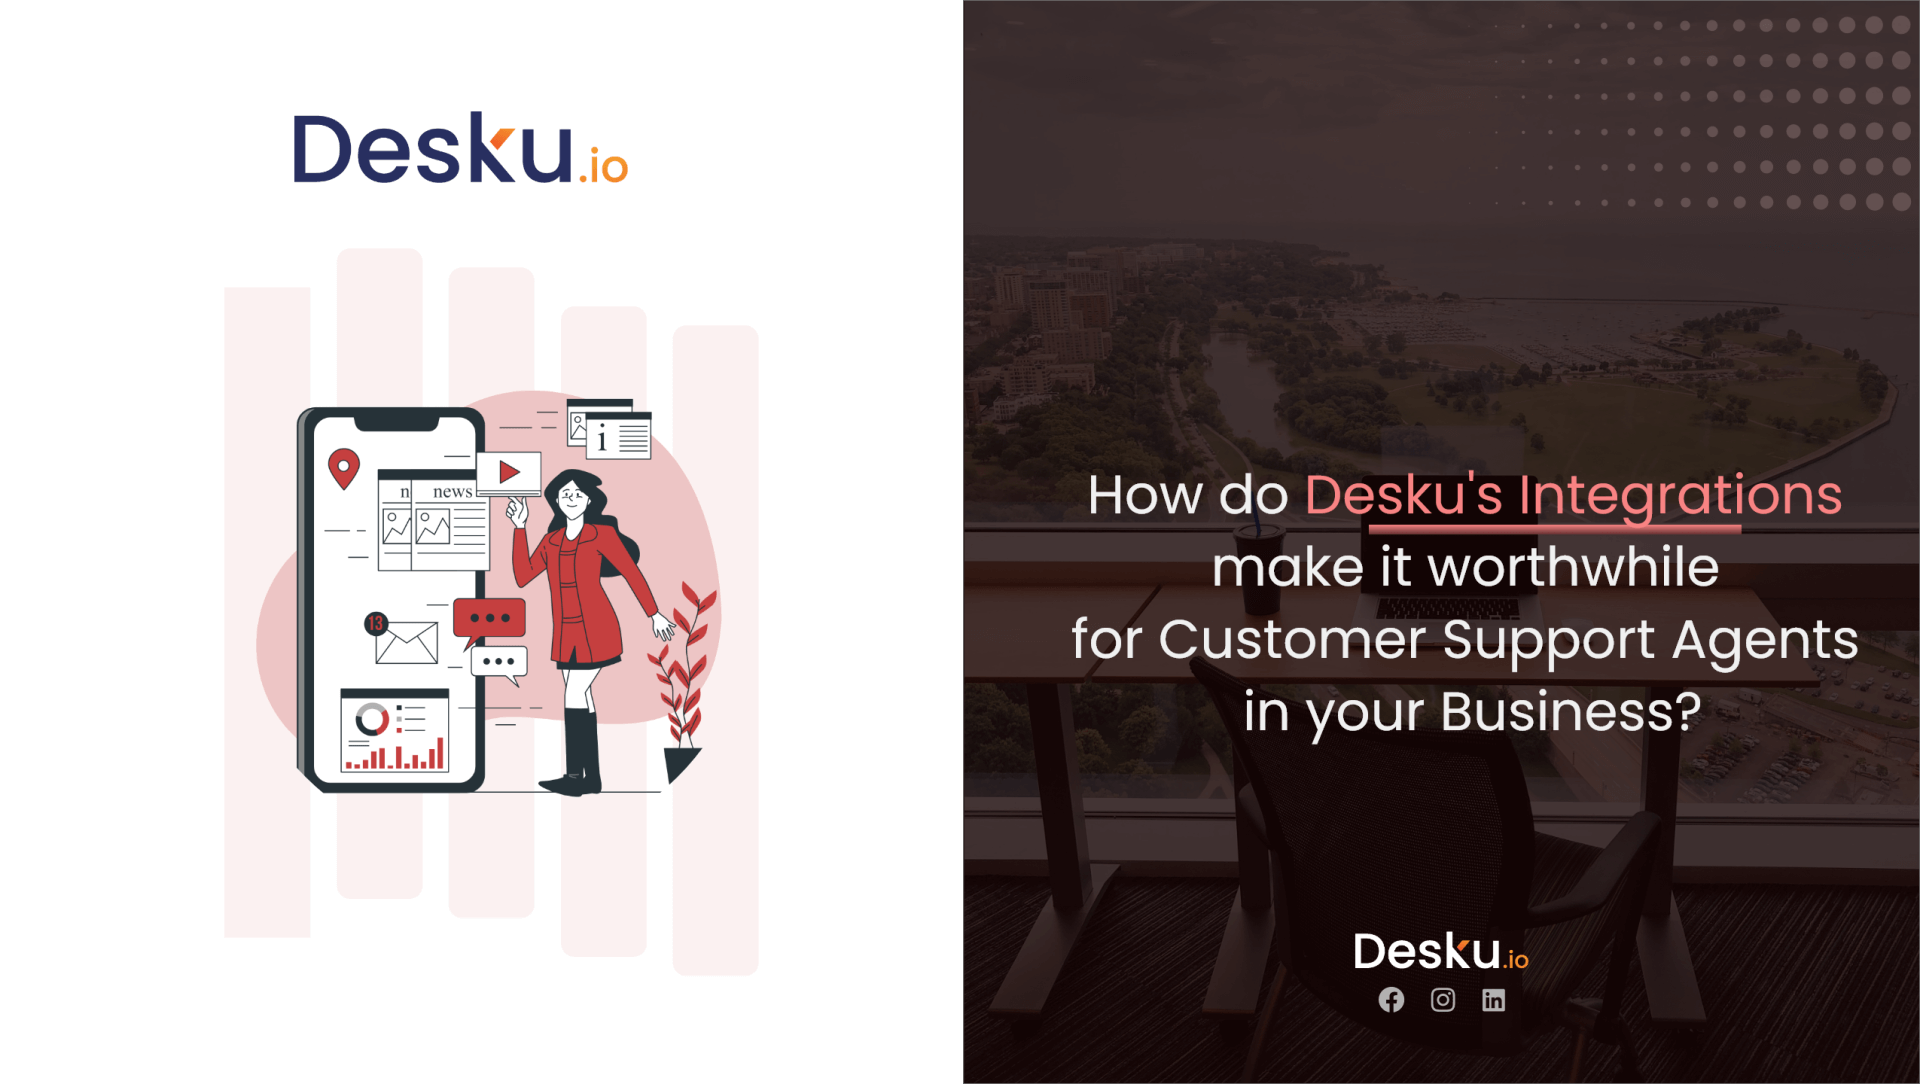 How Do Desku’s Integrations Make It Worthwhile For Customer Support Agents In Your Business?